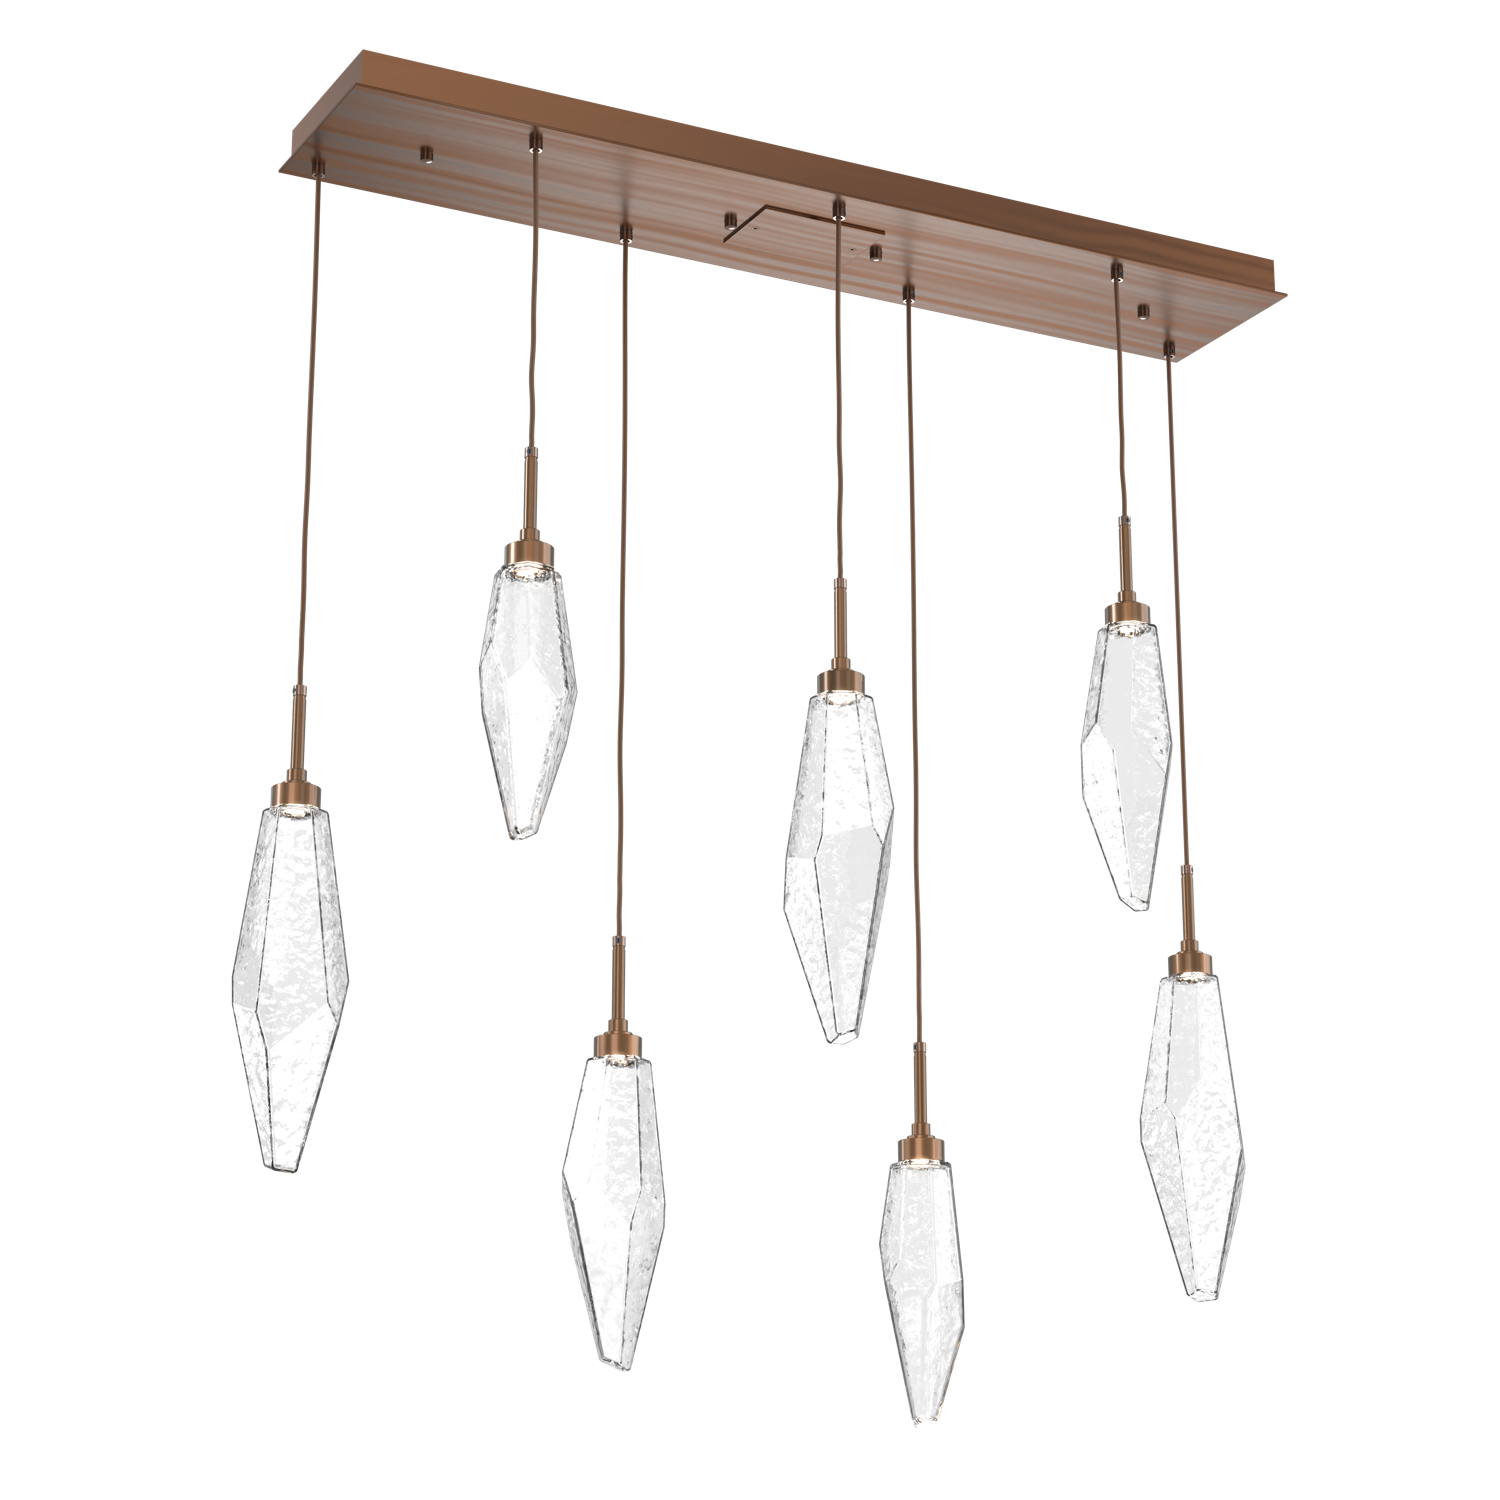 PLB0050-07-RB-CC-Hammerton-Studio-Rock-Crystal-7-light-linear-pendant-chandelier-with-oil-rubbed-bronze-finish-and-clear-glass-shades-and-LED-lamping